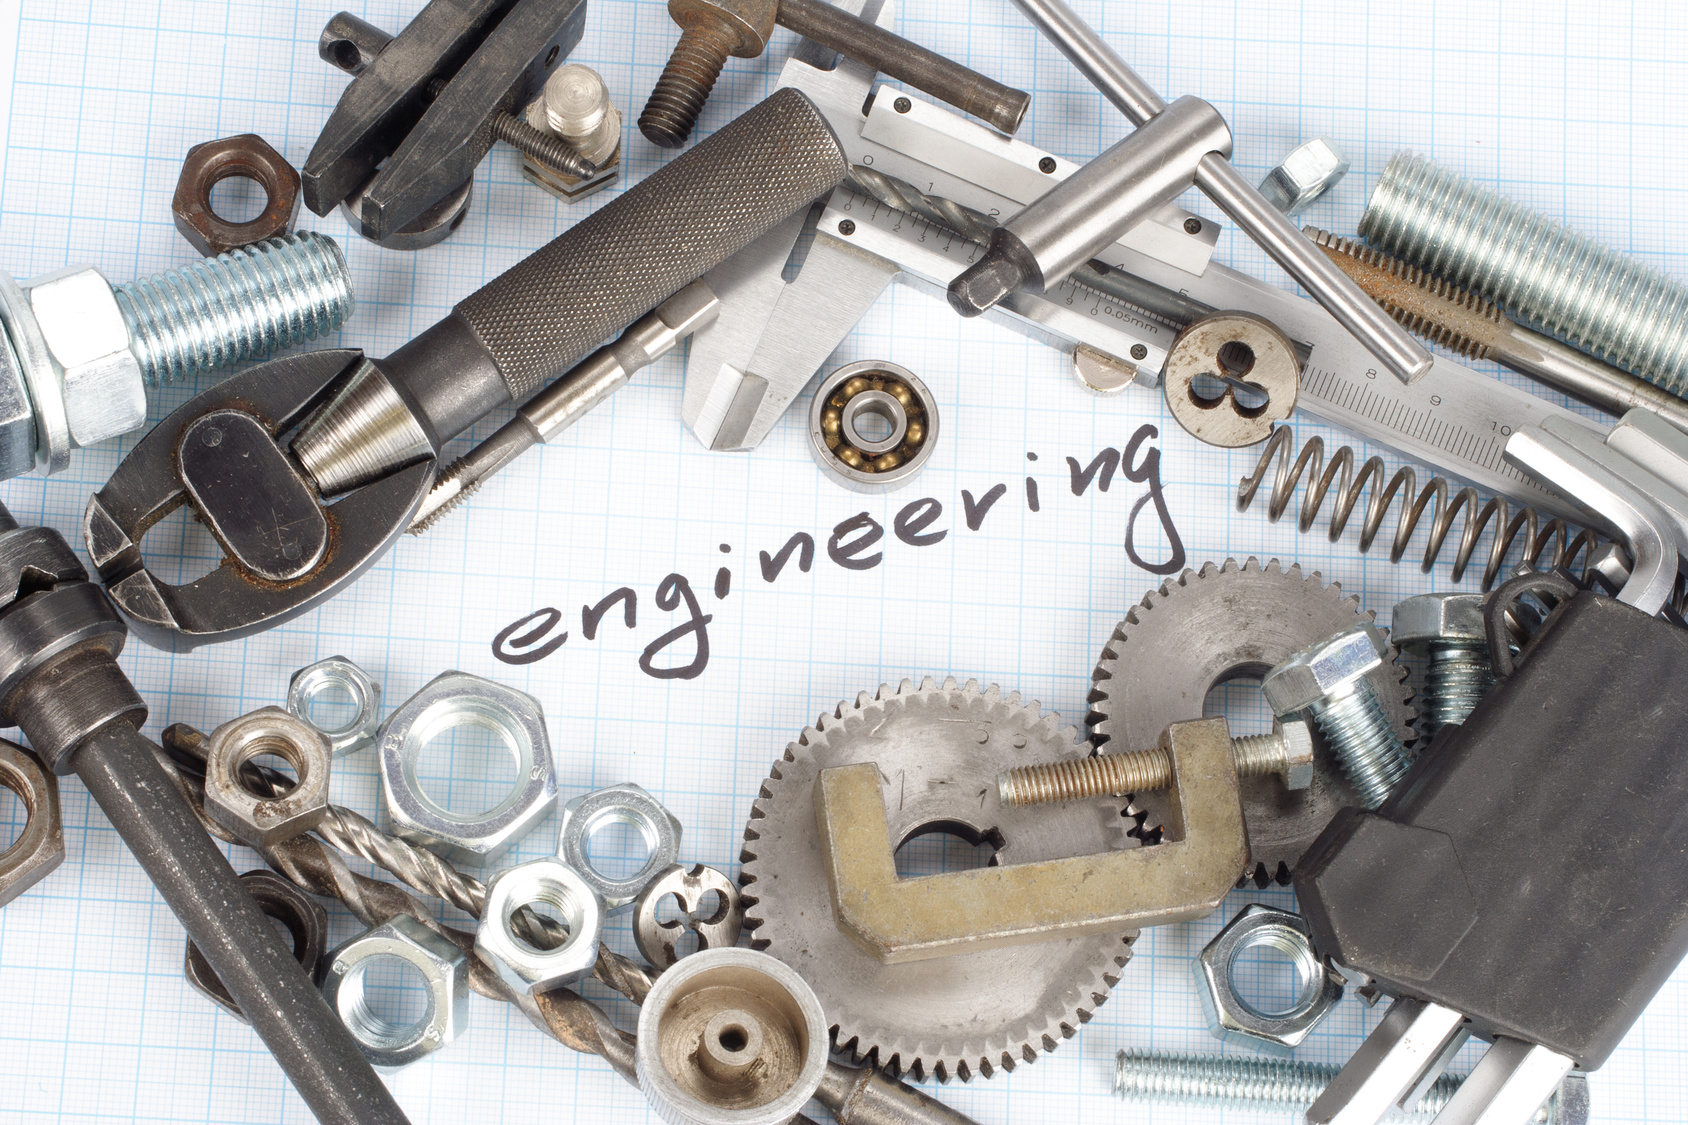 "engineering" - repair parts on graph paper background